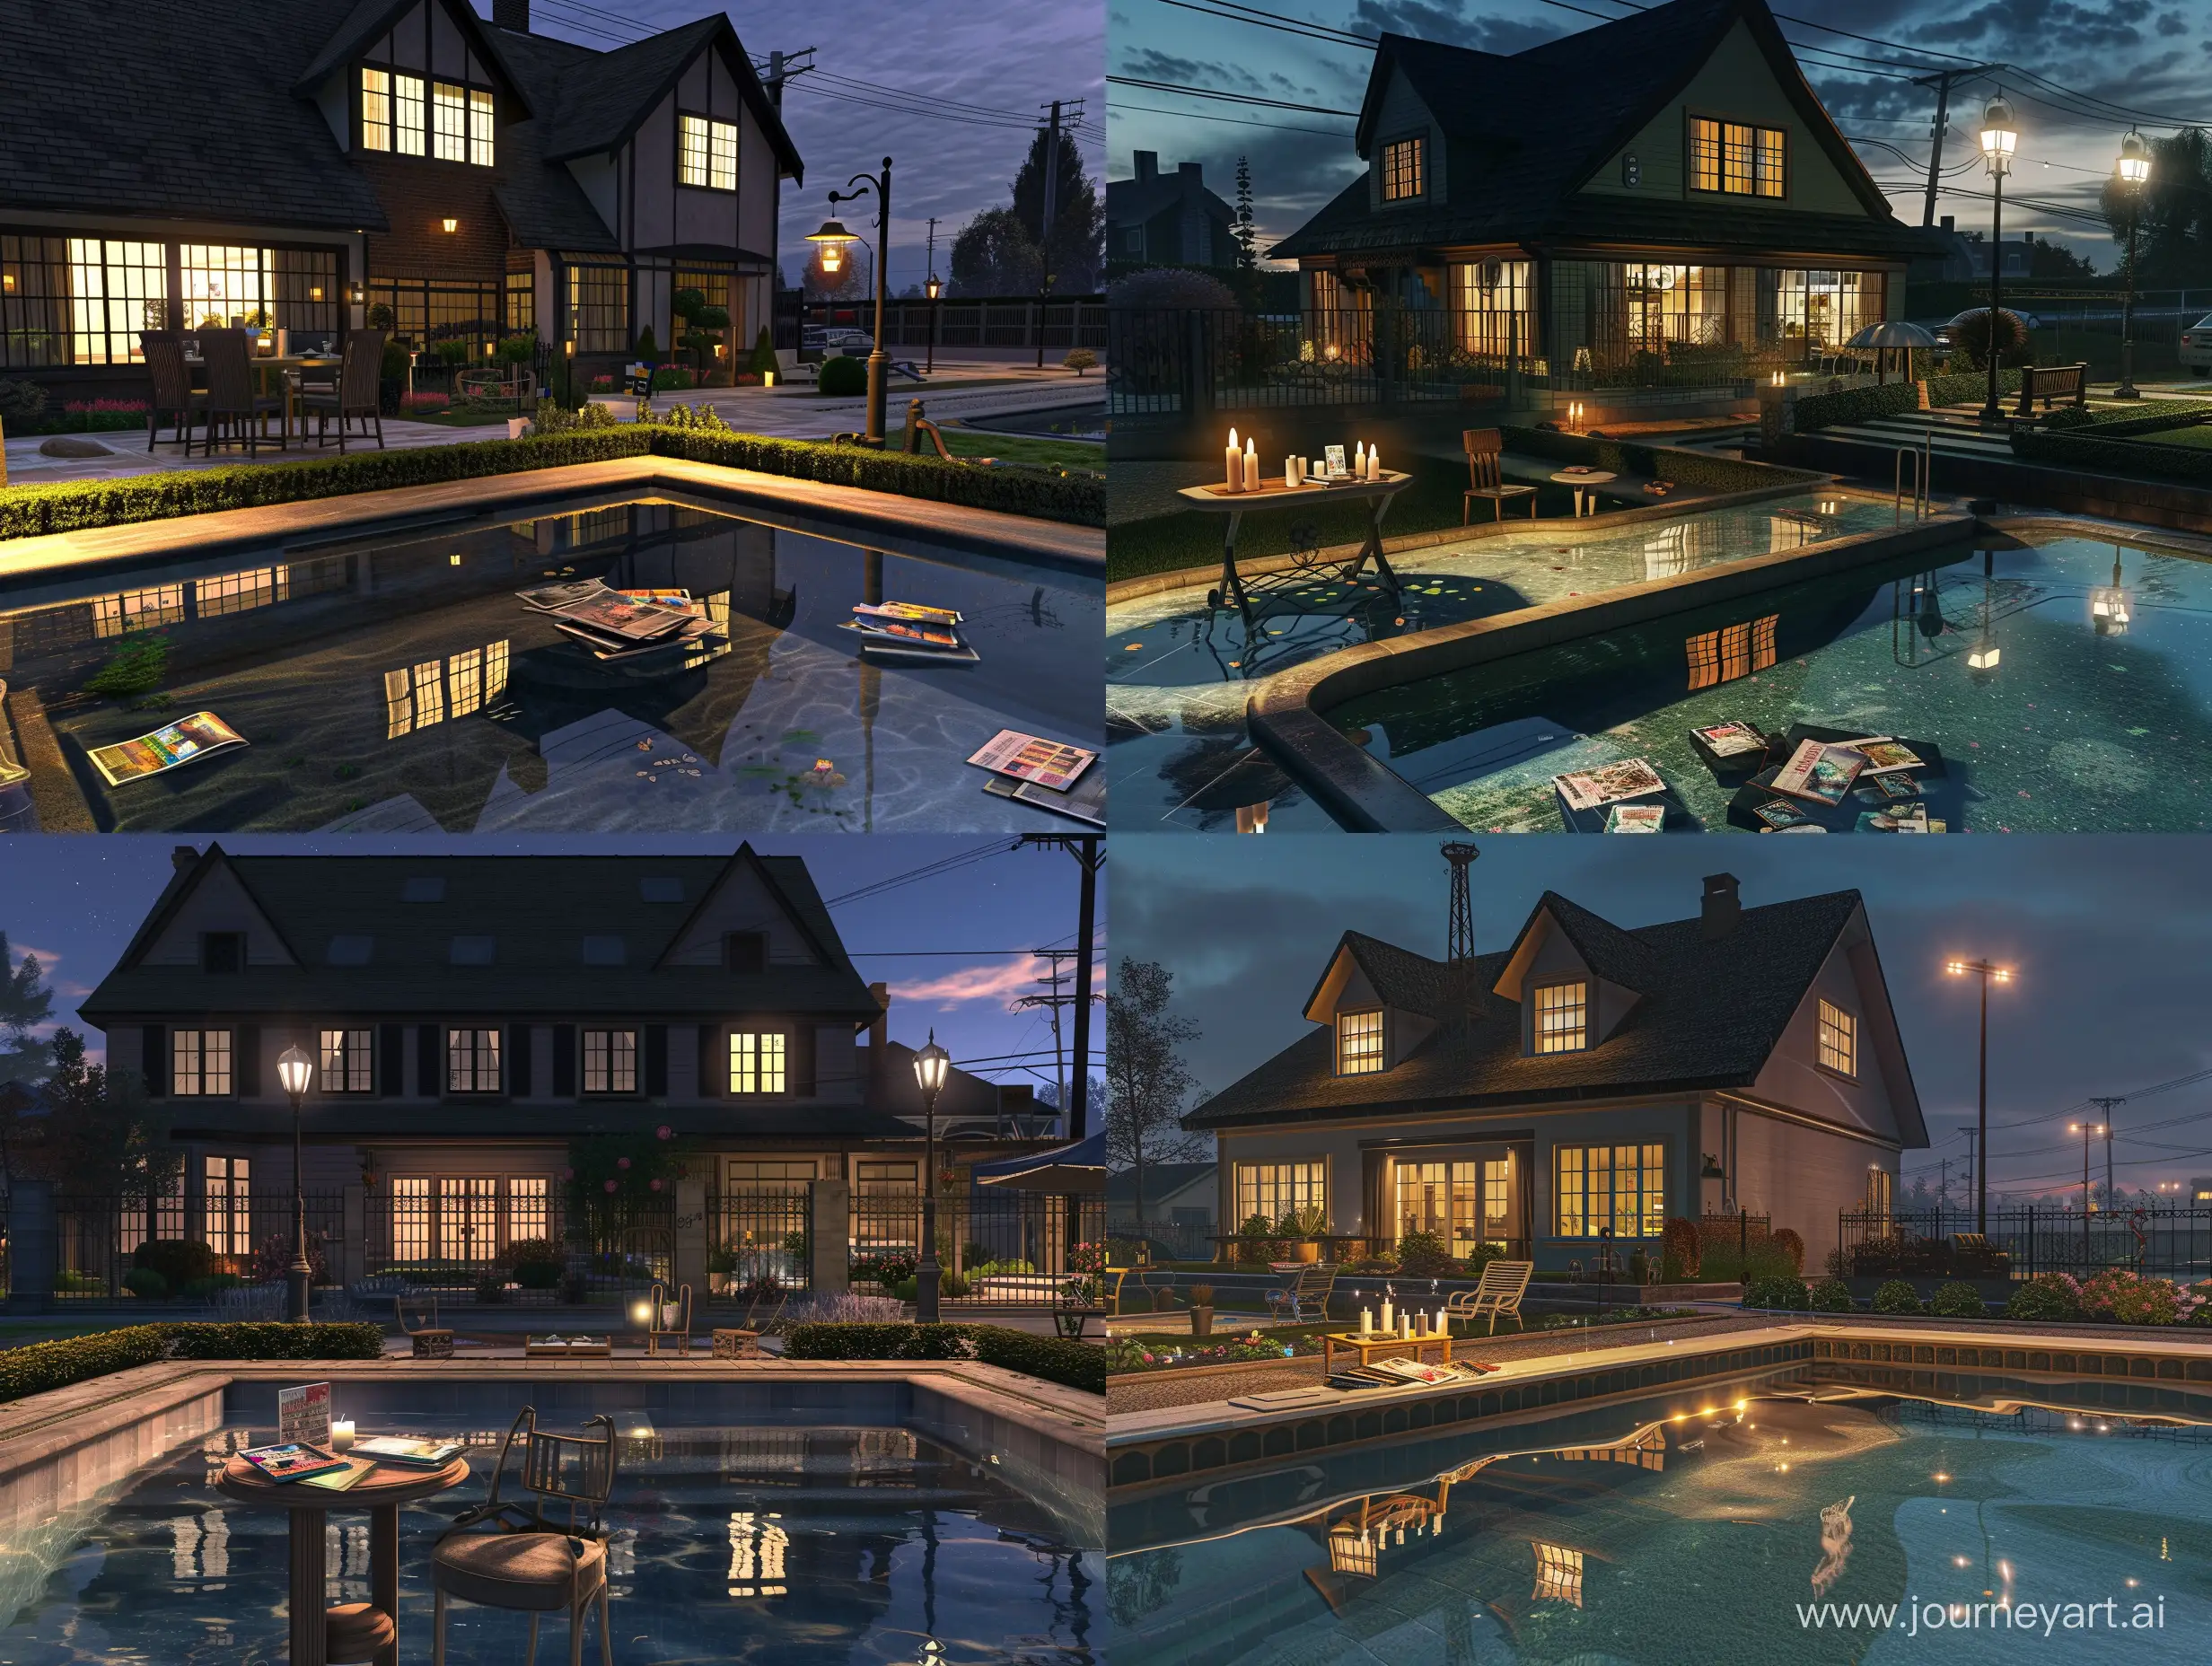 Spacious-American-Style-House-with-Nighttime-Garden-and-Pool